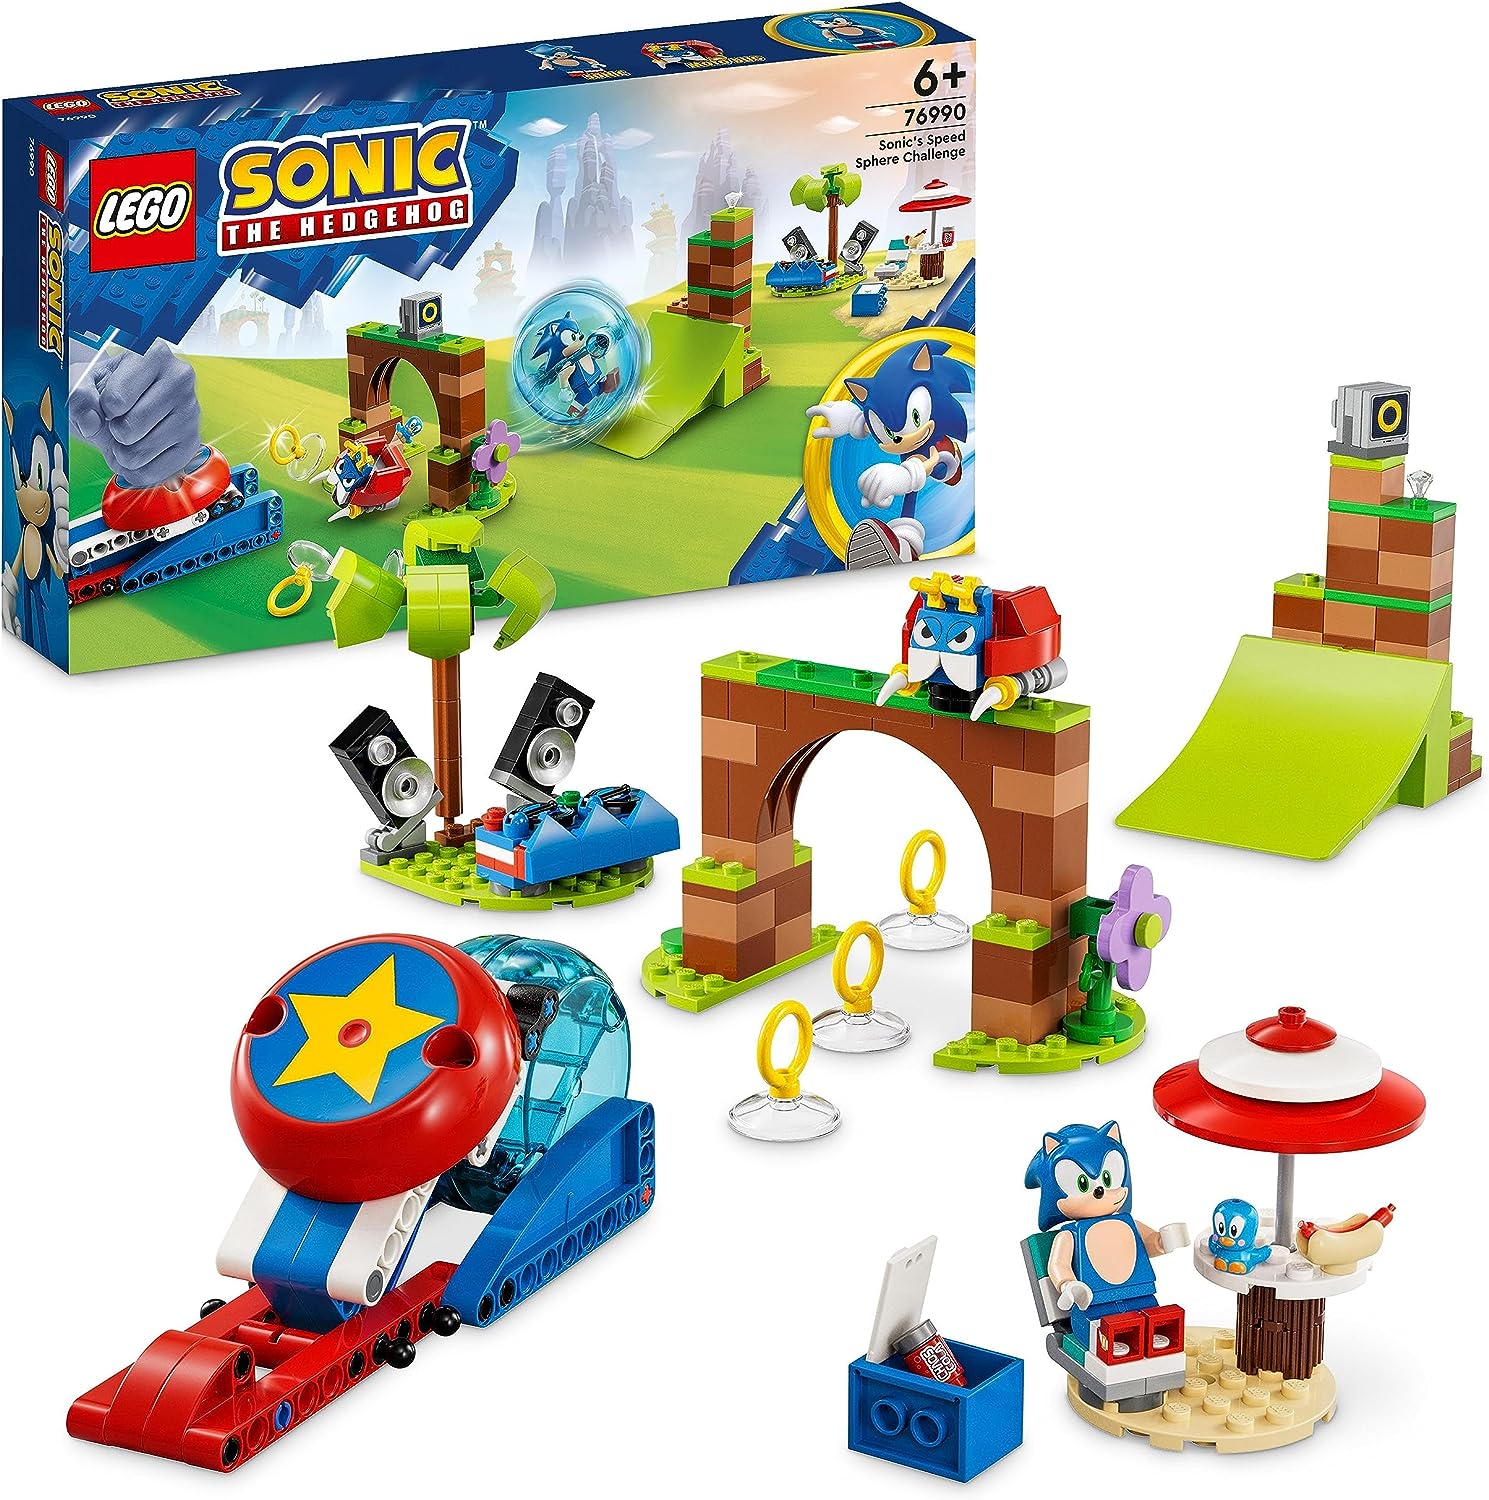 LEGO 76990 Sonic The Hedgehog Sonics Ball Challenge Set, Buildable Game with 3 Characters Including a Moto Bug Badnik Figure, Toy for Children, Boys and Girls from 6 Years